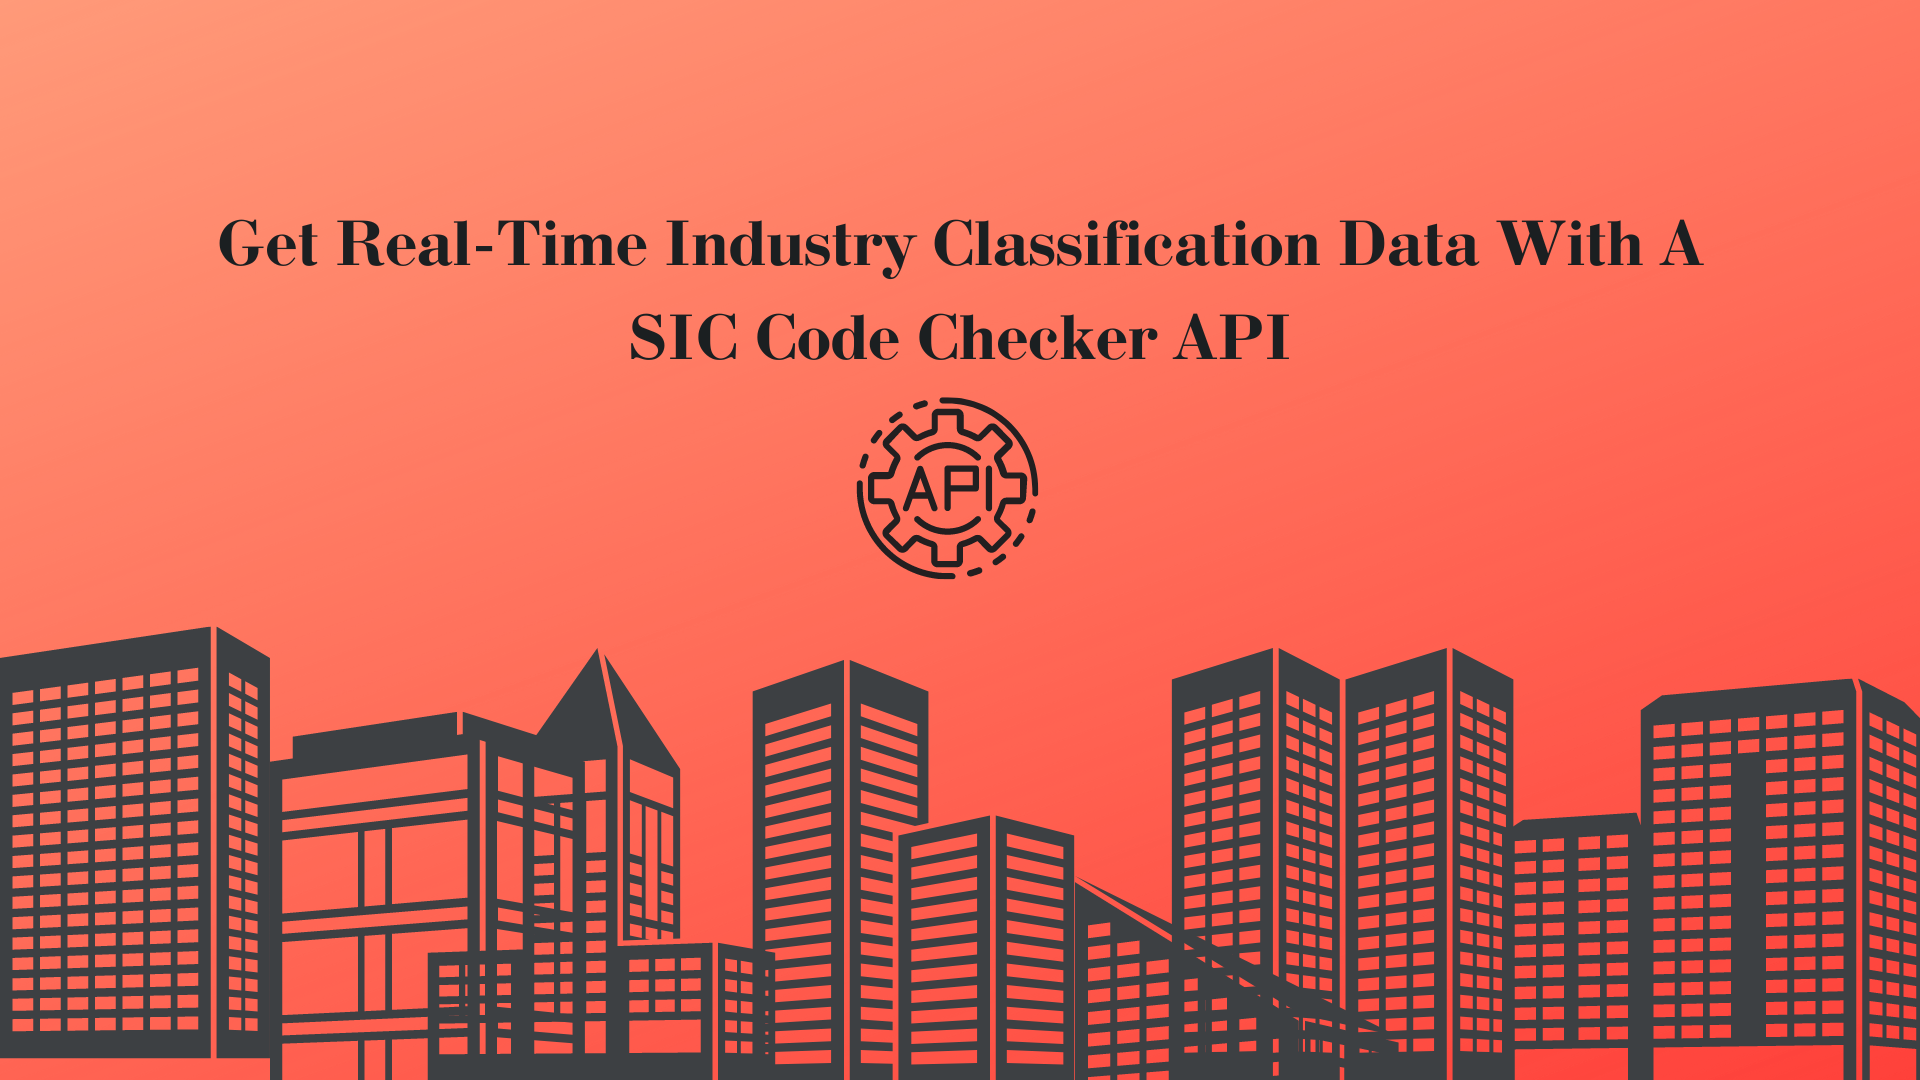 Get Real-Time Industry Classification Data With A SIC Code Checker API